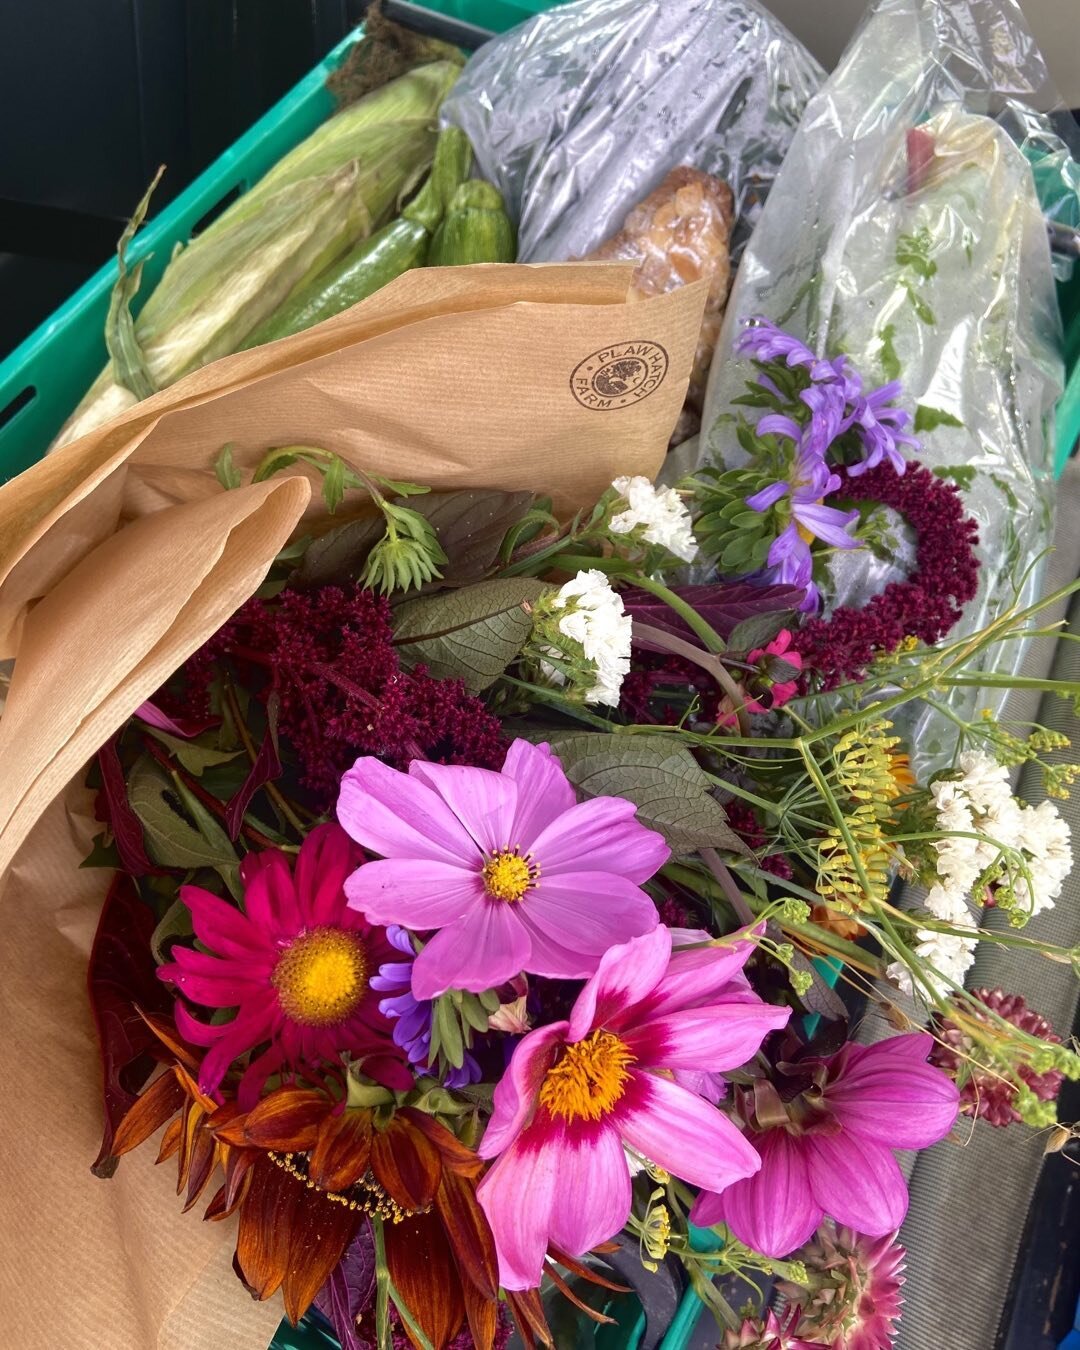 My basket of shopping at the end of the week from @plawhatchfarm . Flowers, sweetcorn, salad pack, spinach, potatoes, peppers and onions. All grown in Plawhatch&rsquo;s garden. What a treat. Thank you 😊.